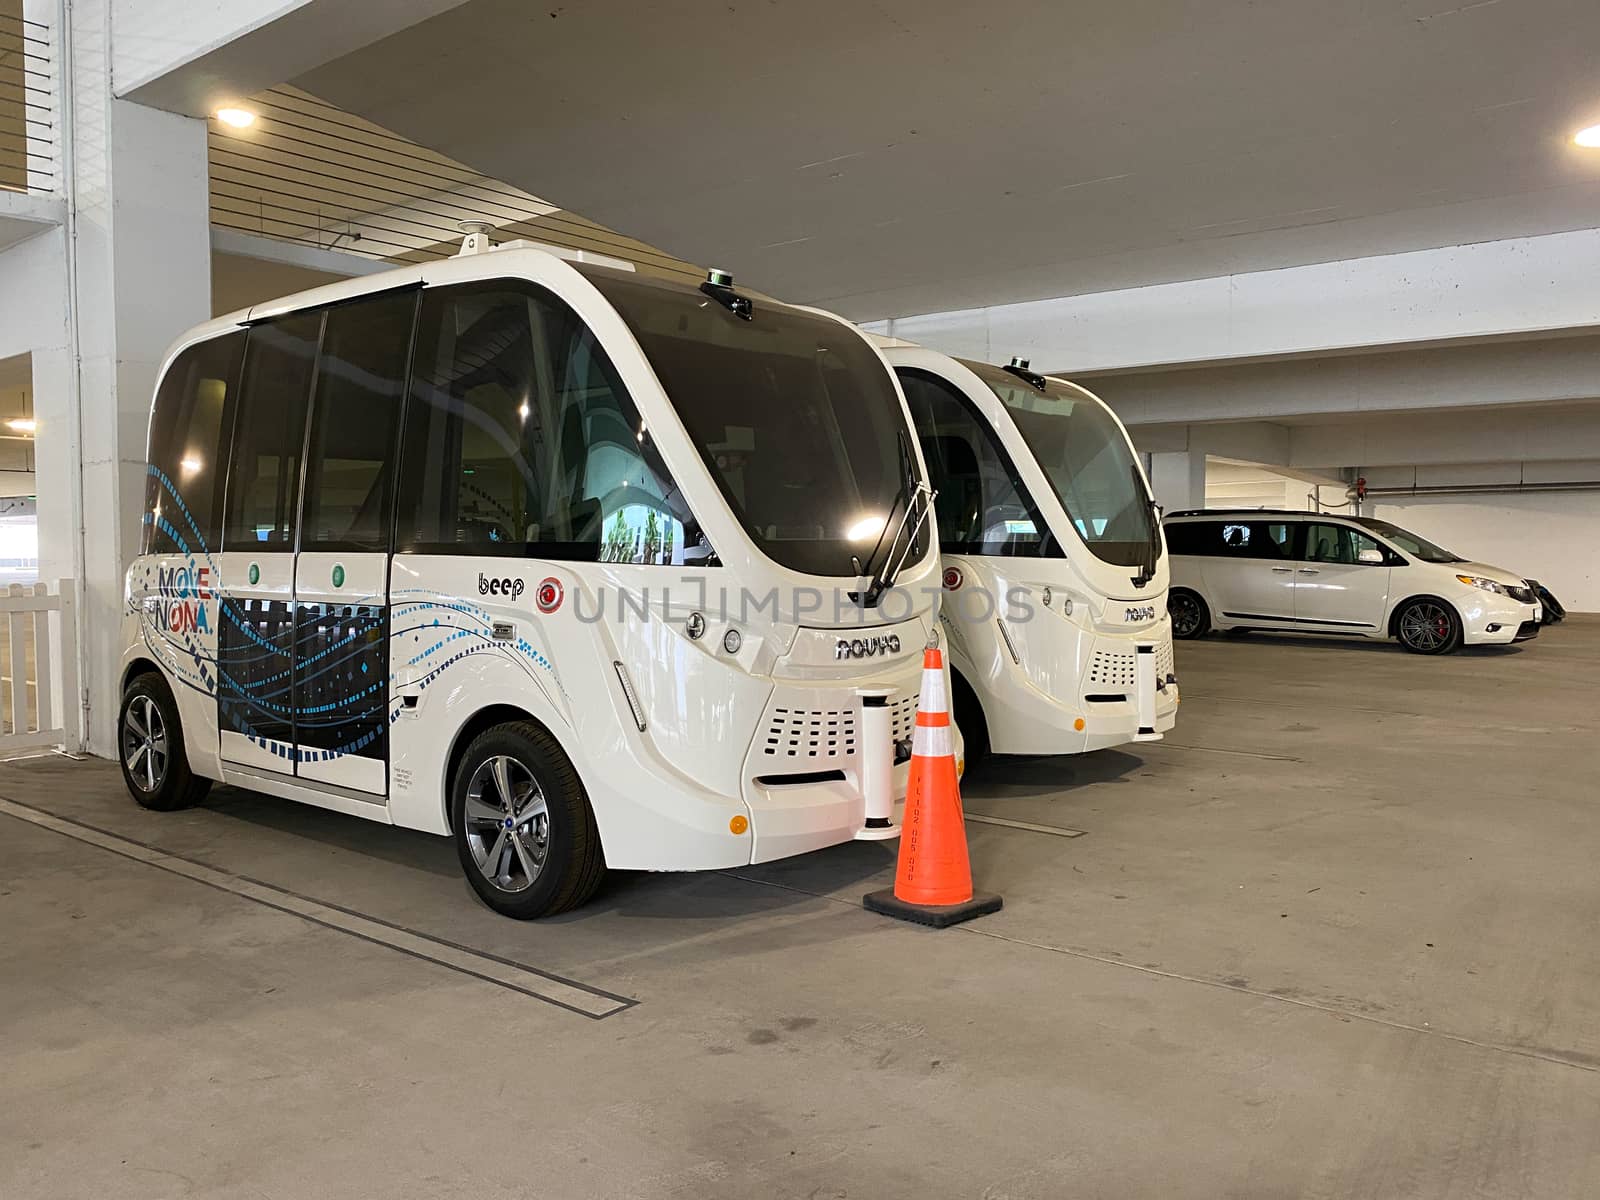  Beep shuttles in a parking garage in Laureate Park, Lake Nona,  by Jshanebutt